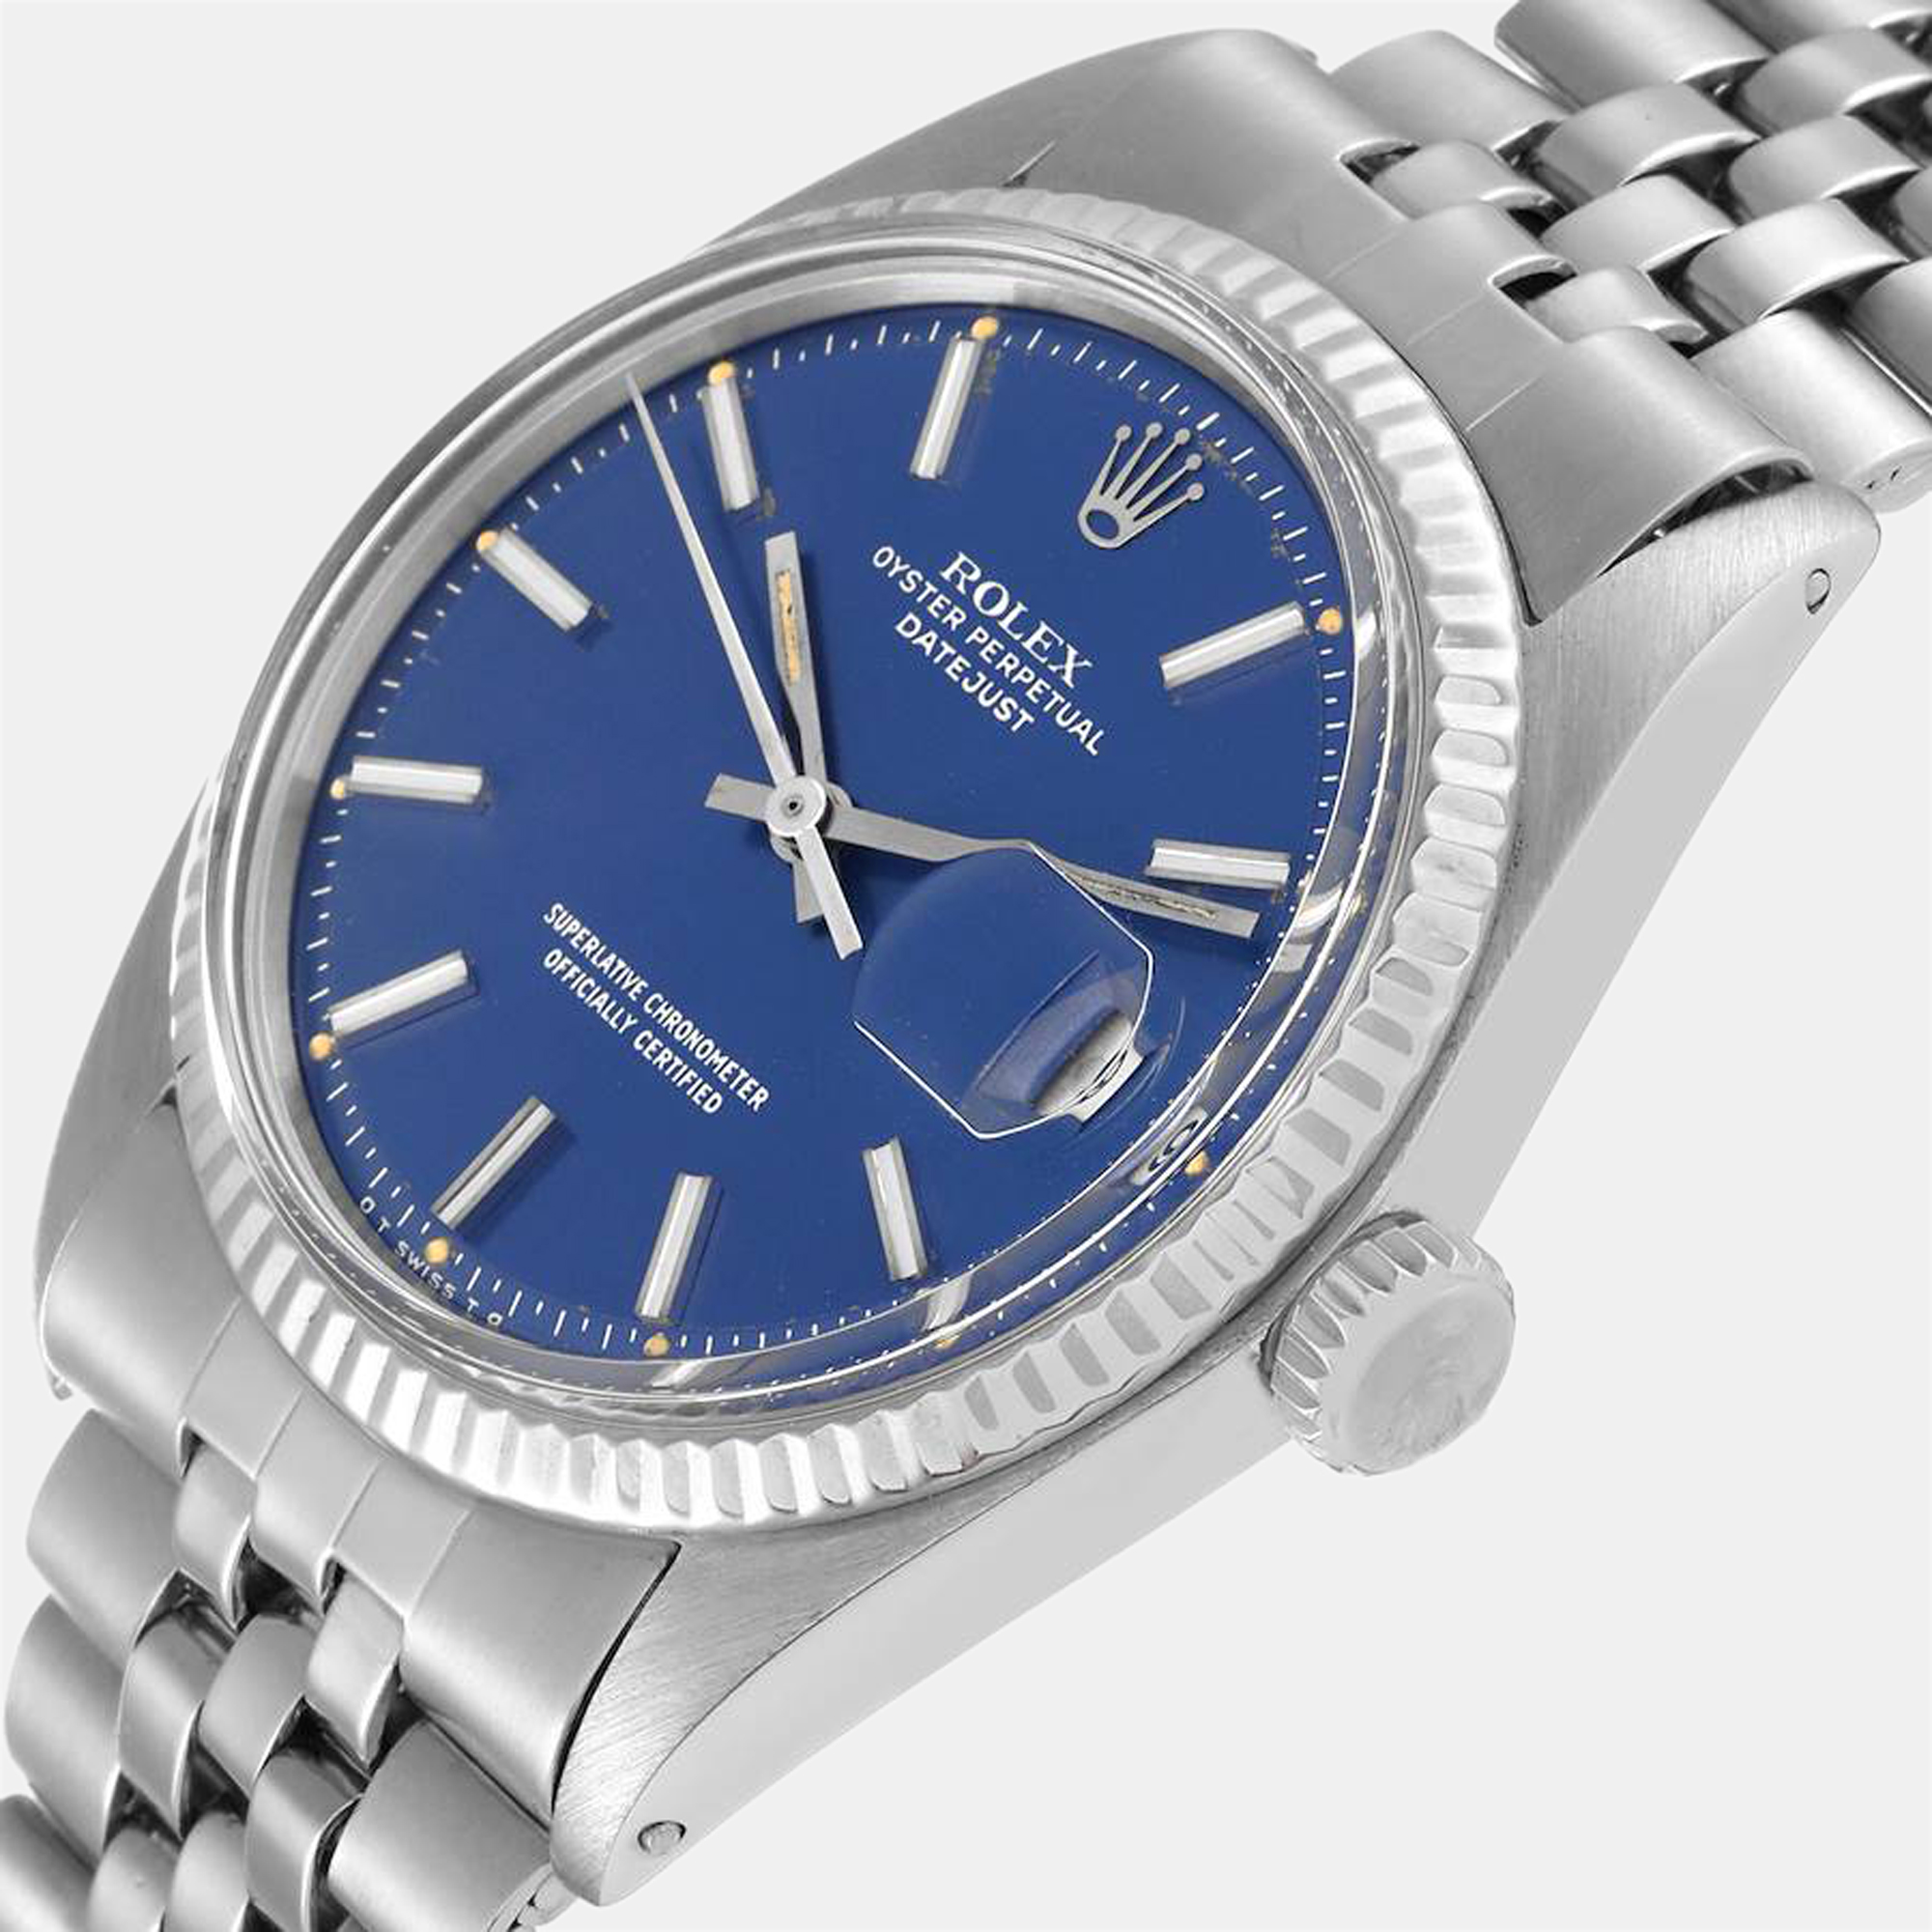 

Rolex Blue 18K White Gold And Stainless Steel Datejust 1601 Men's Wristwatch 36 mm